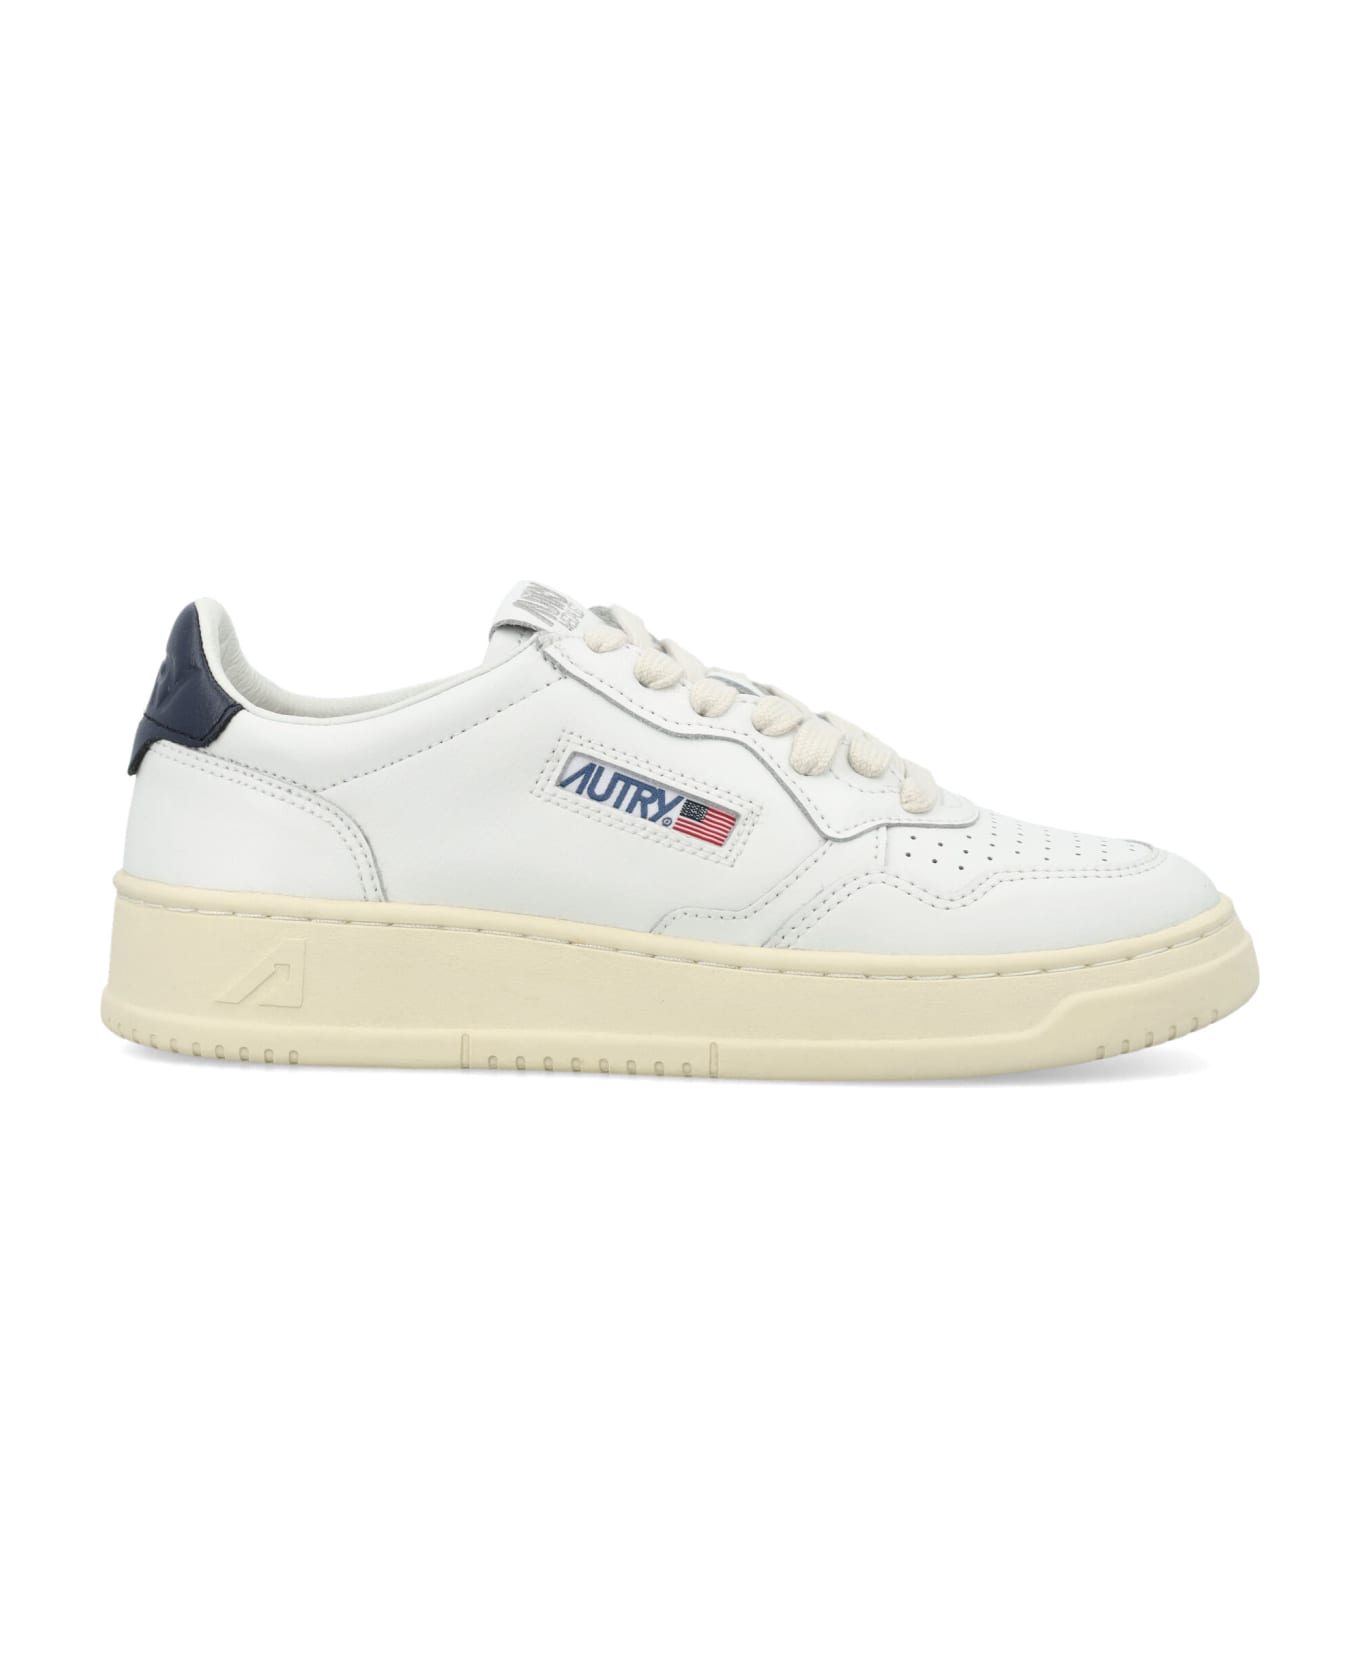 Autry Medalist Low Sneakers Women - WHITE NAVY